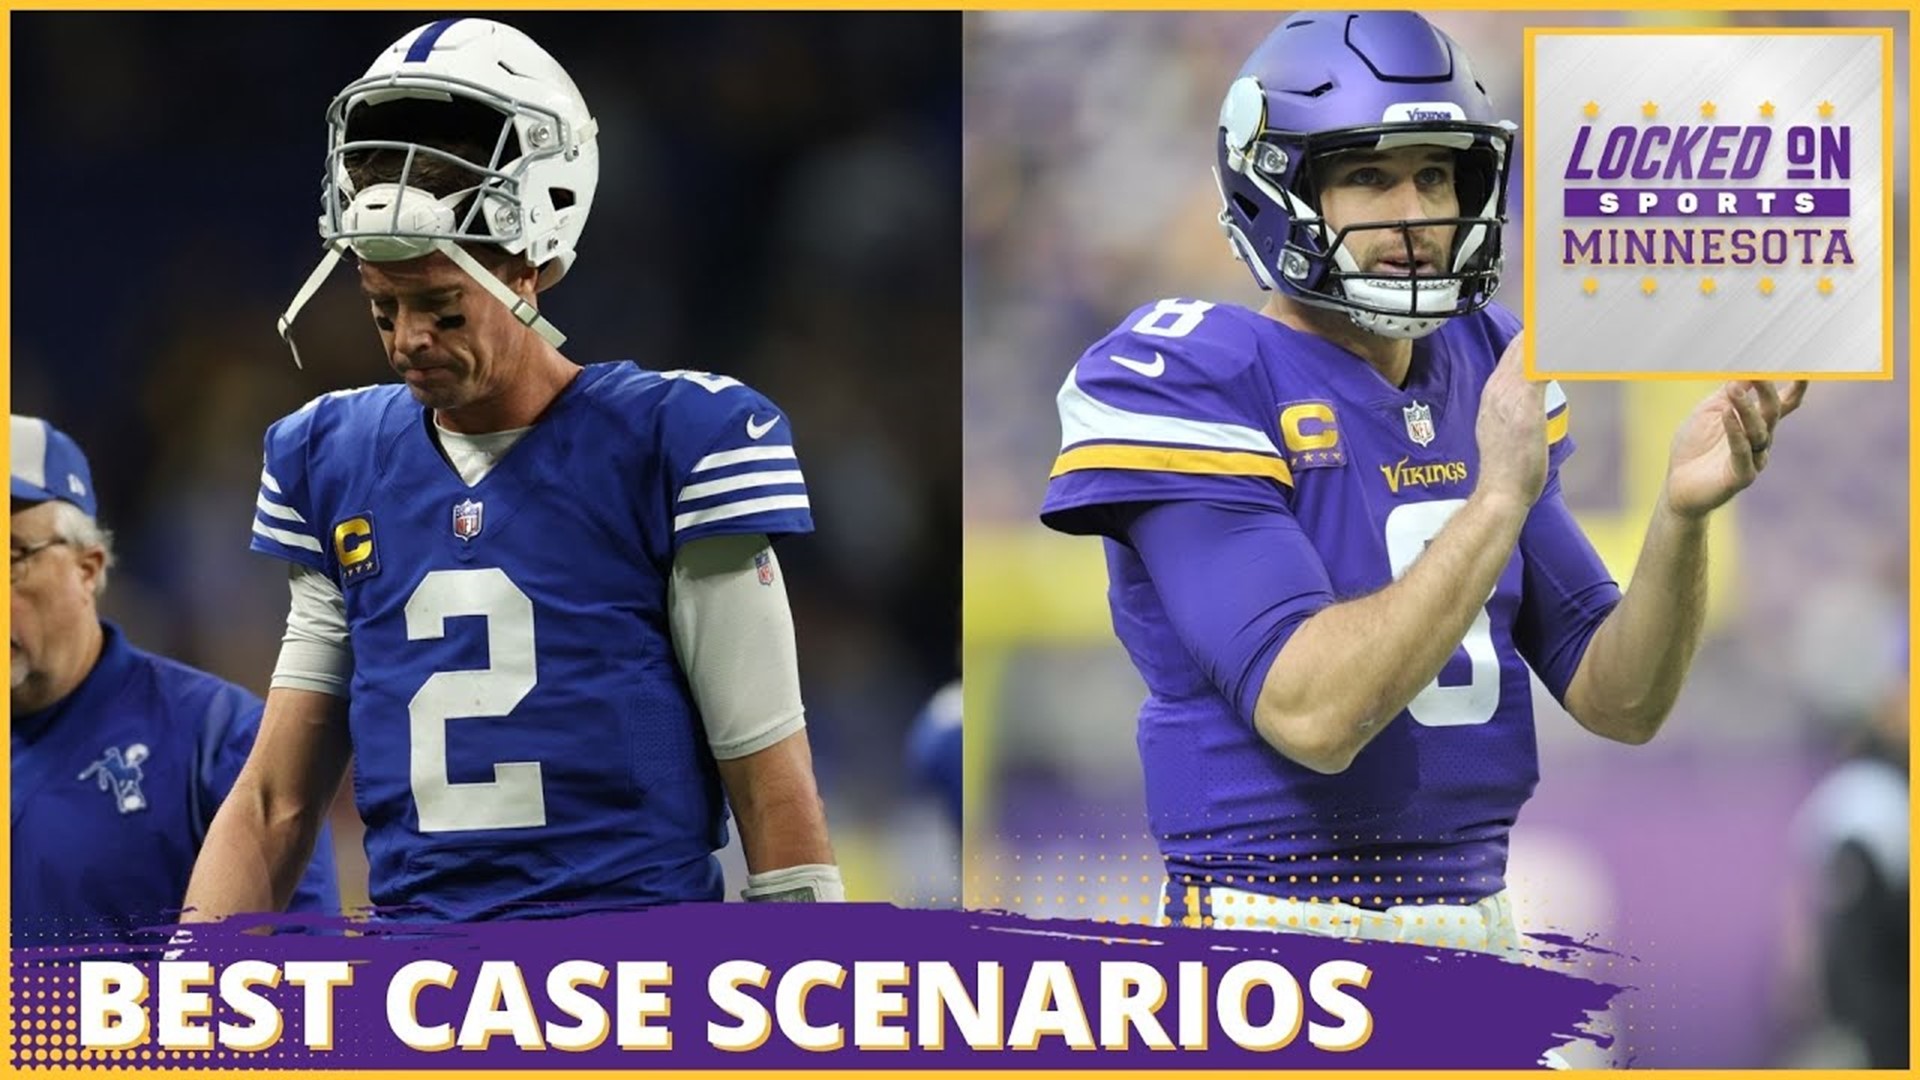 BEST & WORST Scenarios For Minnesota Vikings vs. Indianapolis Colts, Locked On Sports MN Roundtable